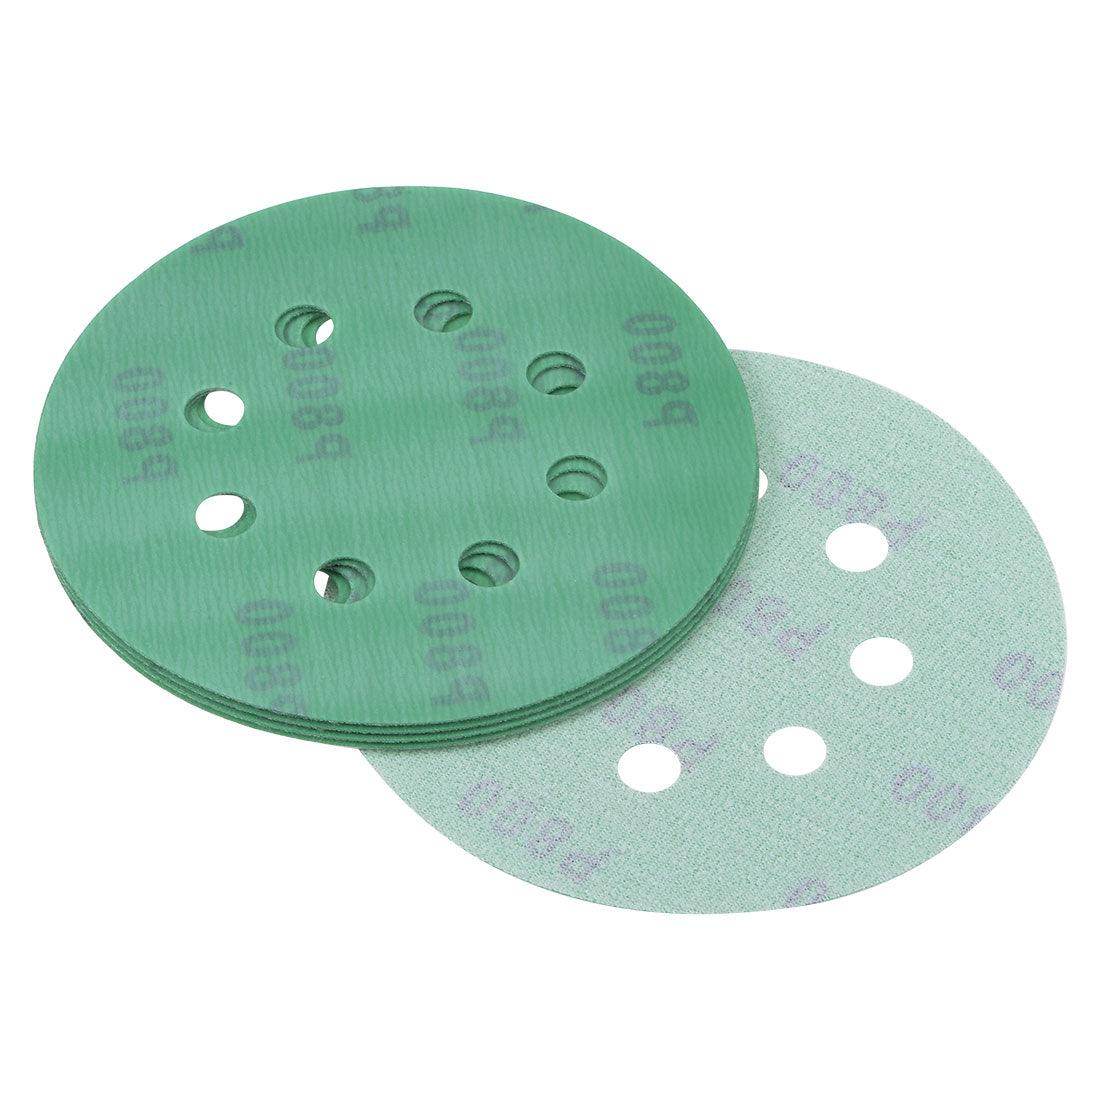 Uxcell Uxcell 5 Inch 8 Hole 800 Grits Hook and Loop Sanding Discs Wet Dry Sandpaper 2pcs